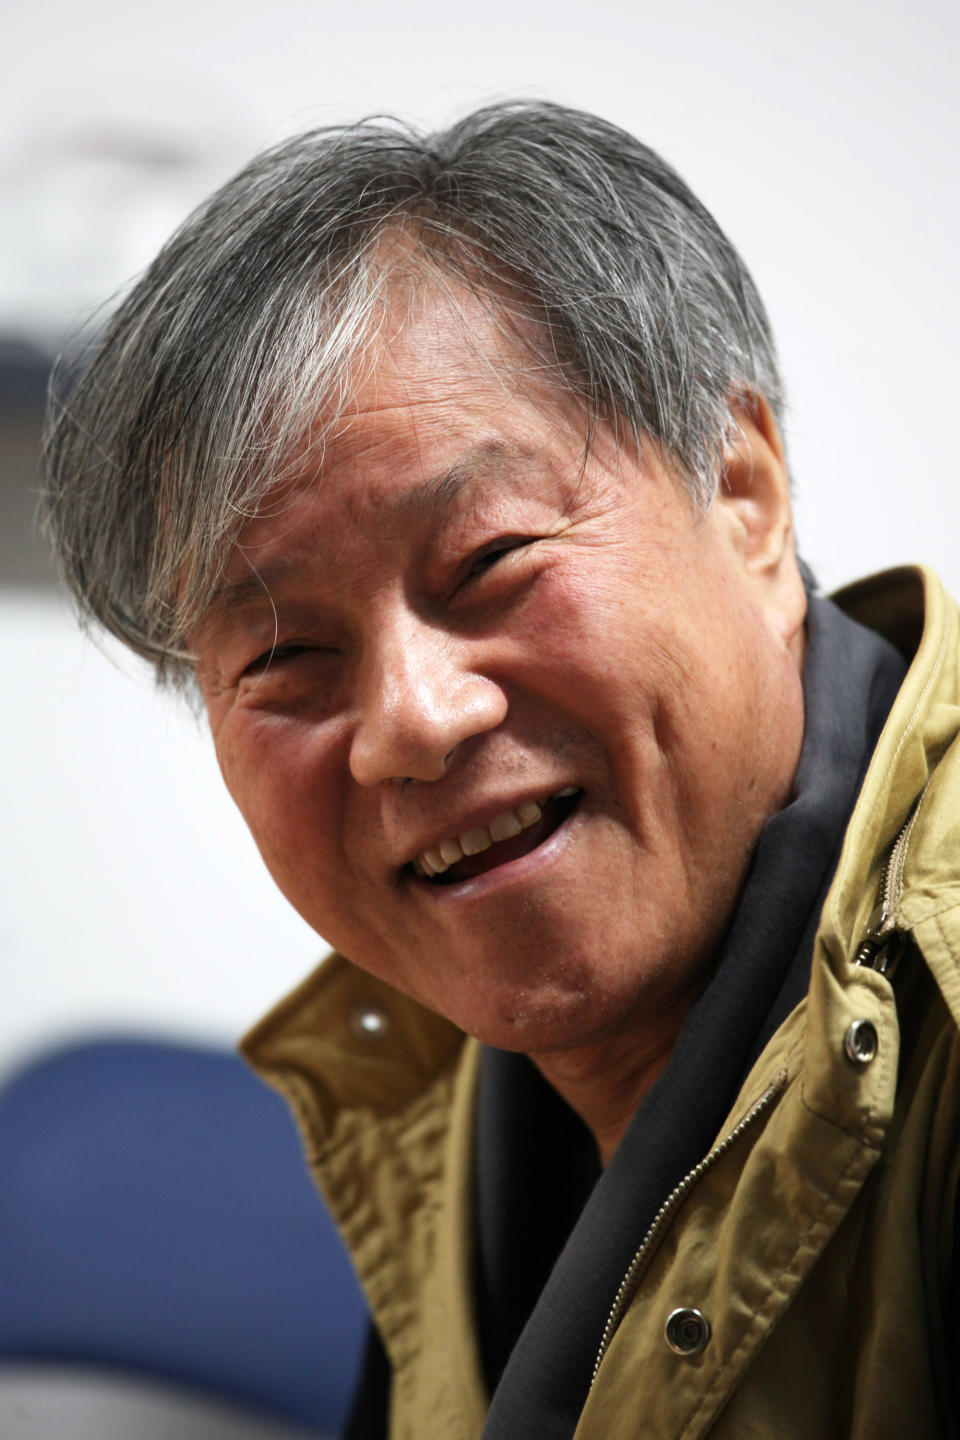 In this Friday, Oct. 4, 2013 photo, South Korean director Lee Jang-ho smiles before the screening of his film "God's Eye View" at Megabox Haeundae Theater during Busan International Film Festival in Busan, South Korea. The new drama by Lee, well-known in South Korea for his commercial movies in the 1970s and the 1980s, borrows from true events to examine religious conviction in a country that sends out many of the world’s Christian missionaries. The film portrays Christian volunteers kidnapped by Muslim rebels while on an evangelical mission in a fictional Islamic country. The film directly references the 2007 crisis in which 23 members of Saemmul Presbyterian Church were taken as hostages by the Taliban in Afghanistan in 2007, and two of them were killed. (AP Photo/Woohae Cho)